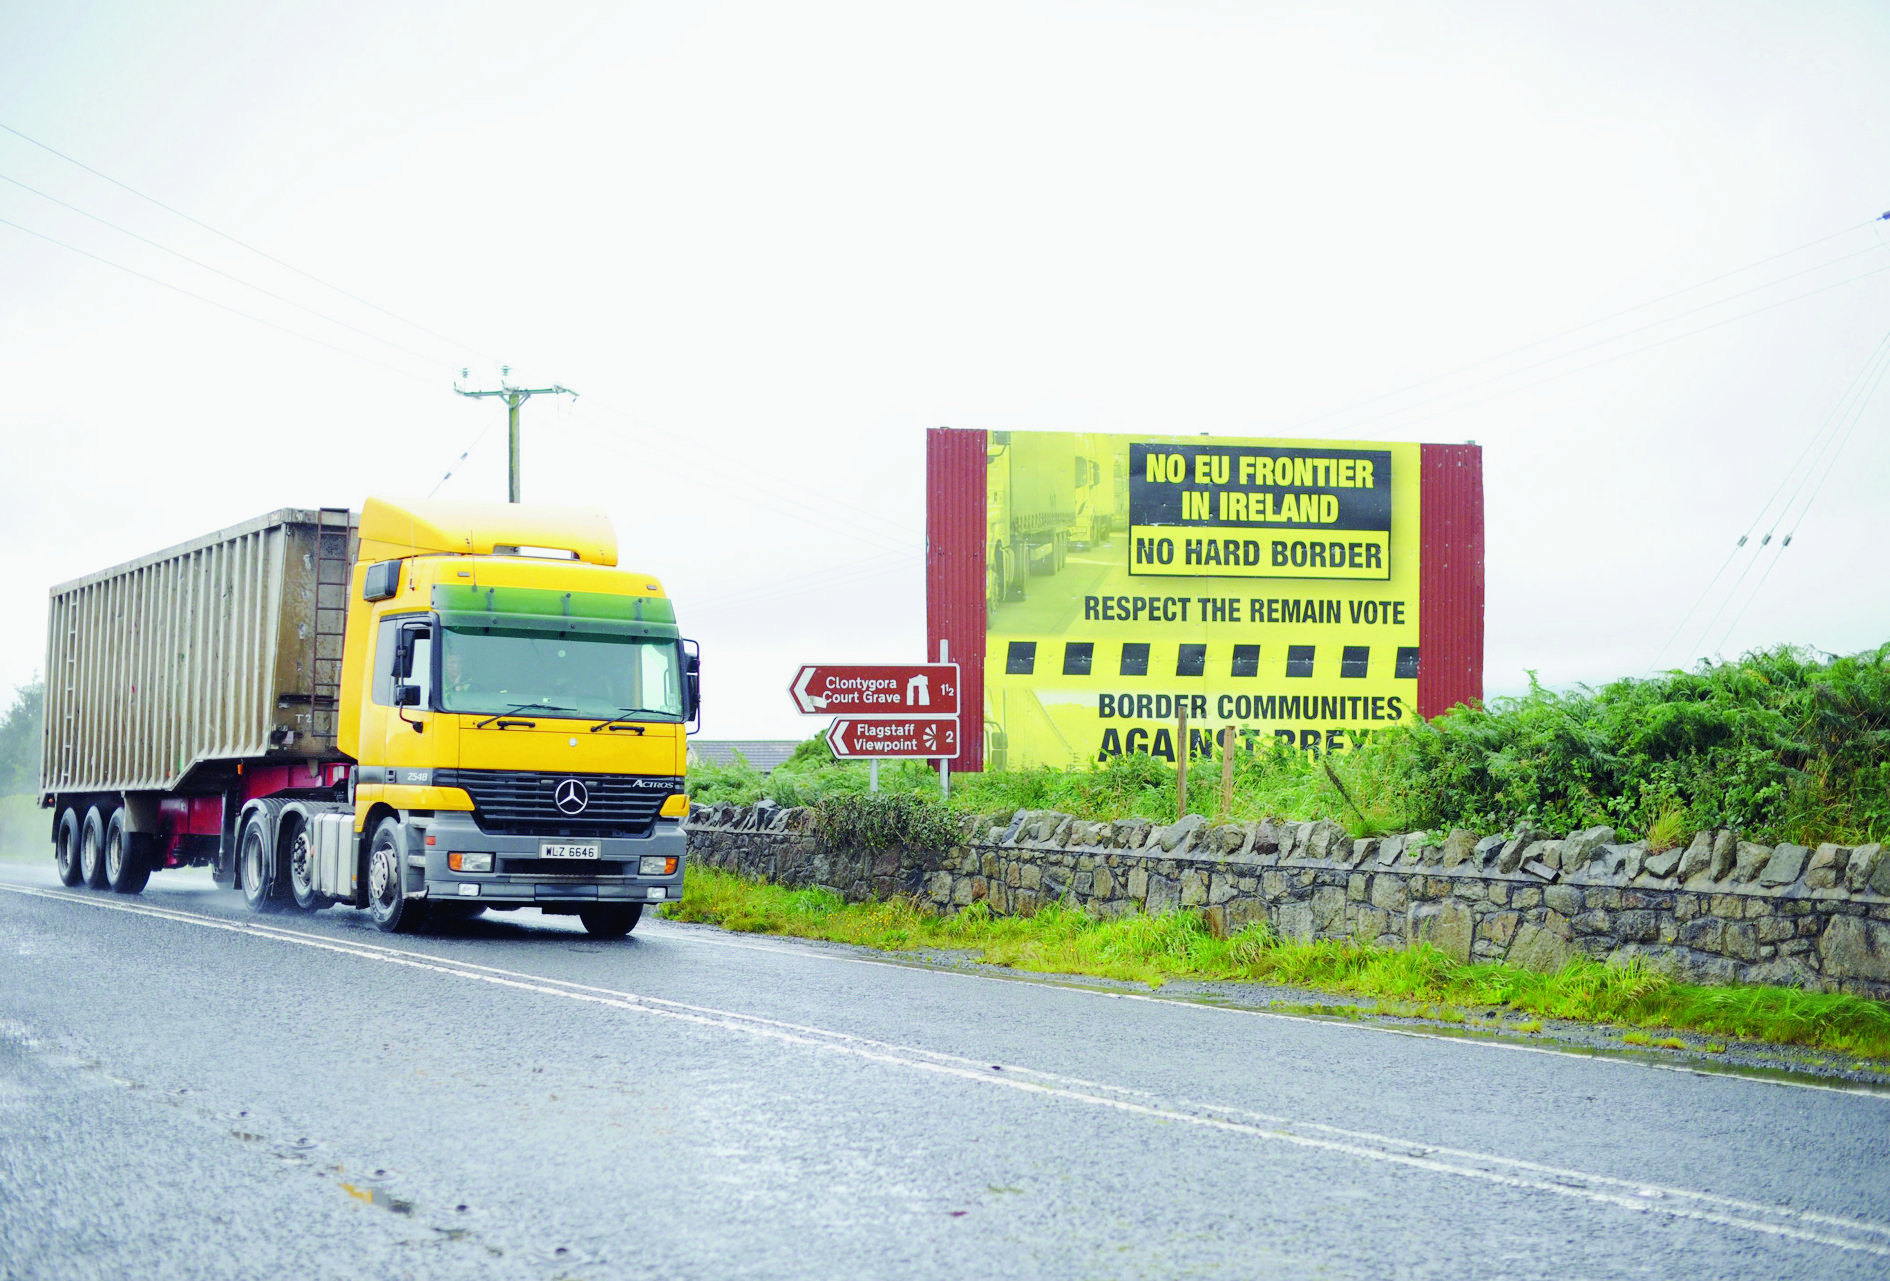 epa06154742 A truck passes a sign calling for not returning to hard border crossings after Brexit near Killeen, Northern Ireland, Britain, 21 August 2017, near the border with The Republic of Ireland. Britainís decision to leave the EU means that the current open border policy is a problem that the politicians are trying to resolve before Brexit in 2019.  EPA/AIDAN CRAWLEY BRITAIN NORTHERN IRELAND IRELAND BORDER